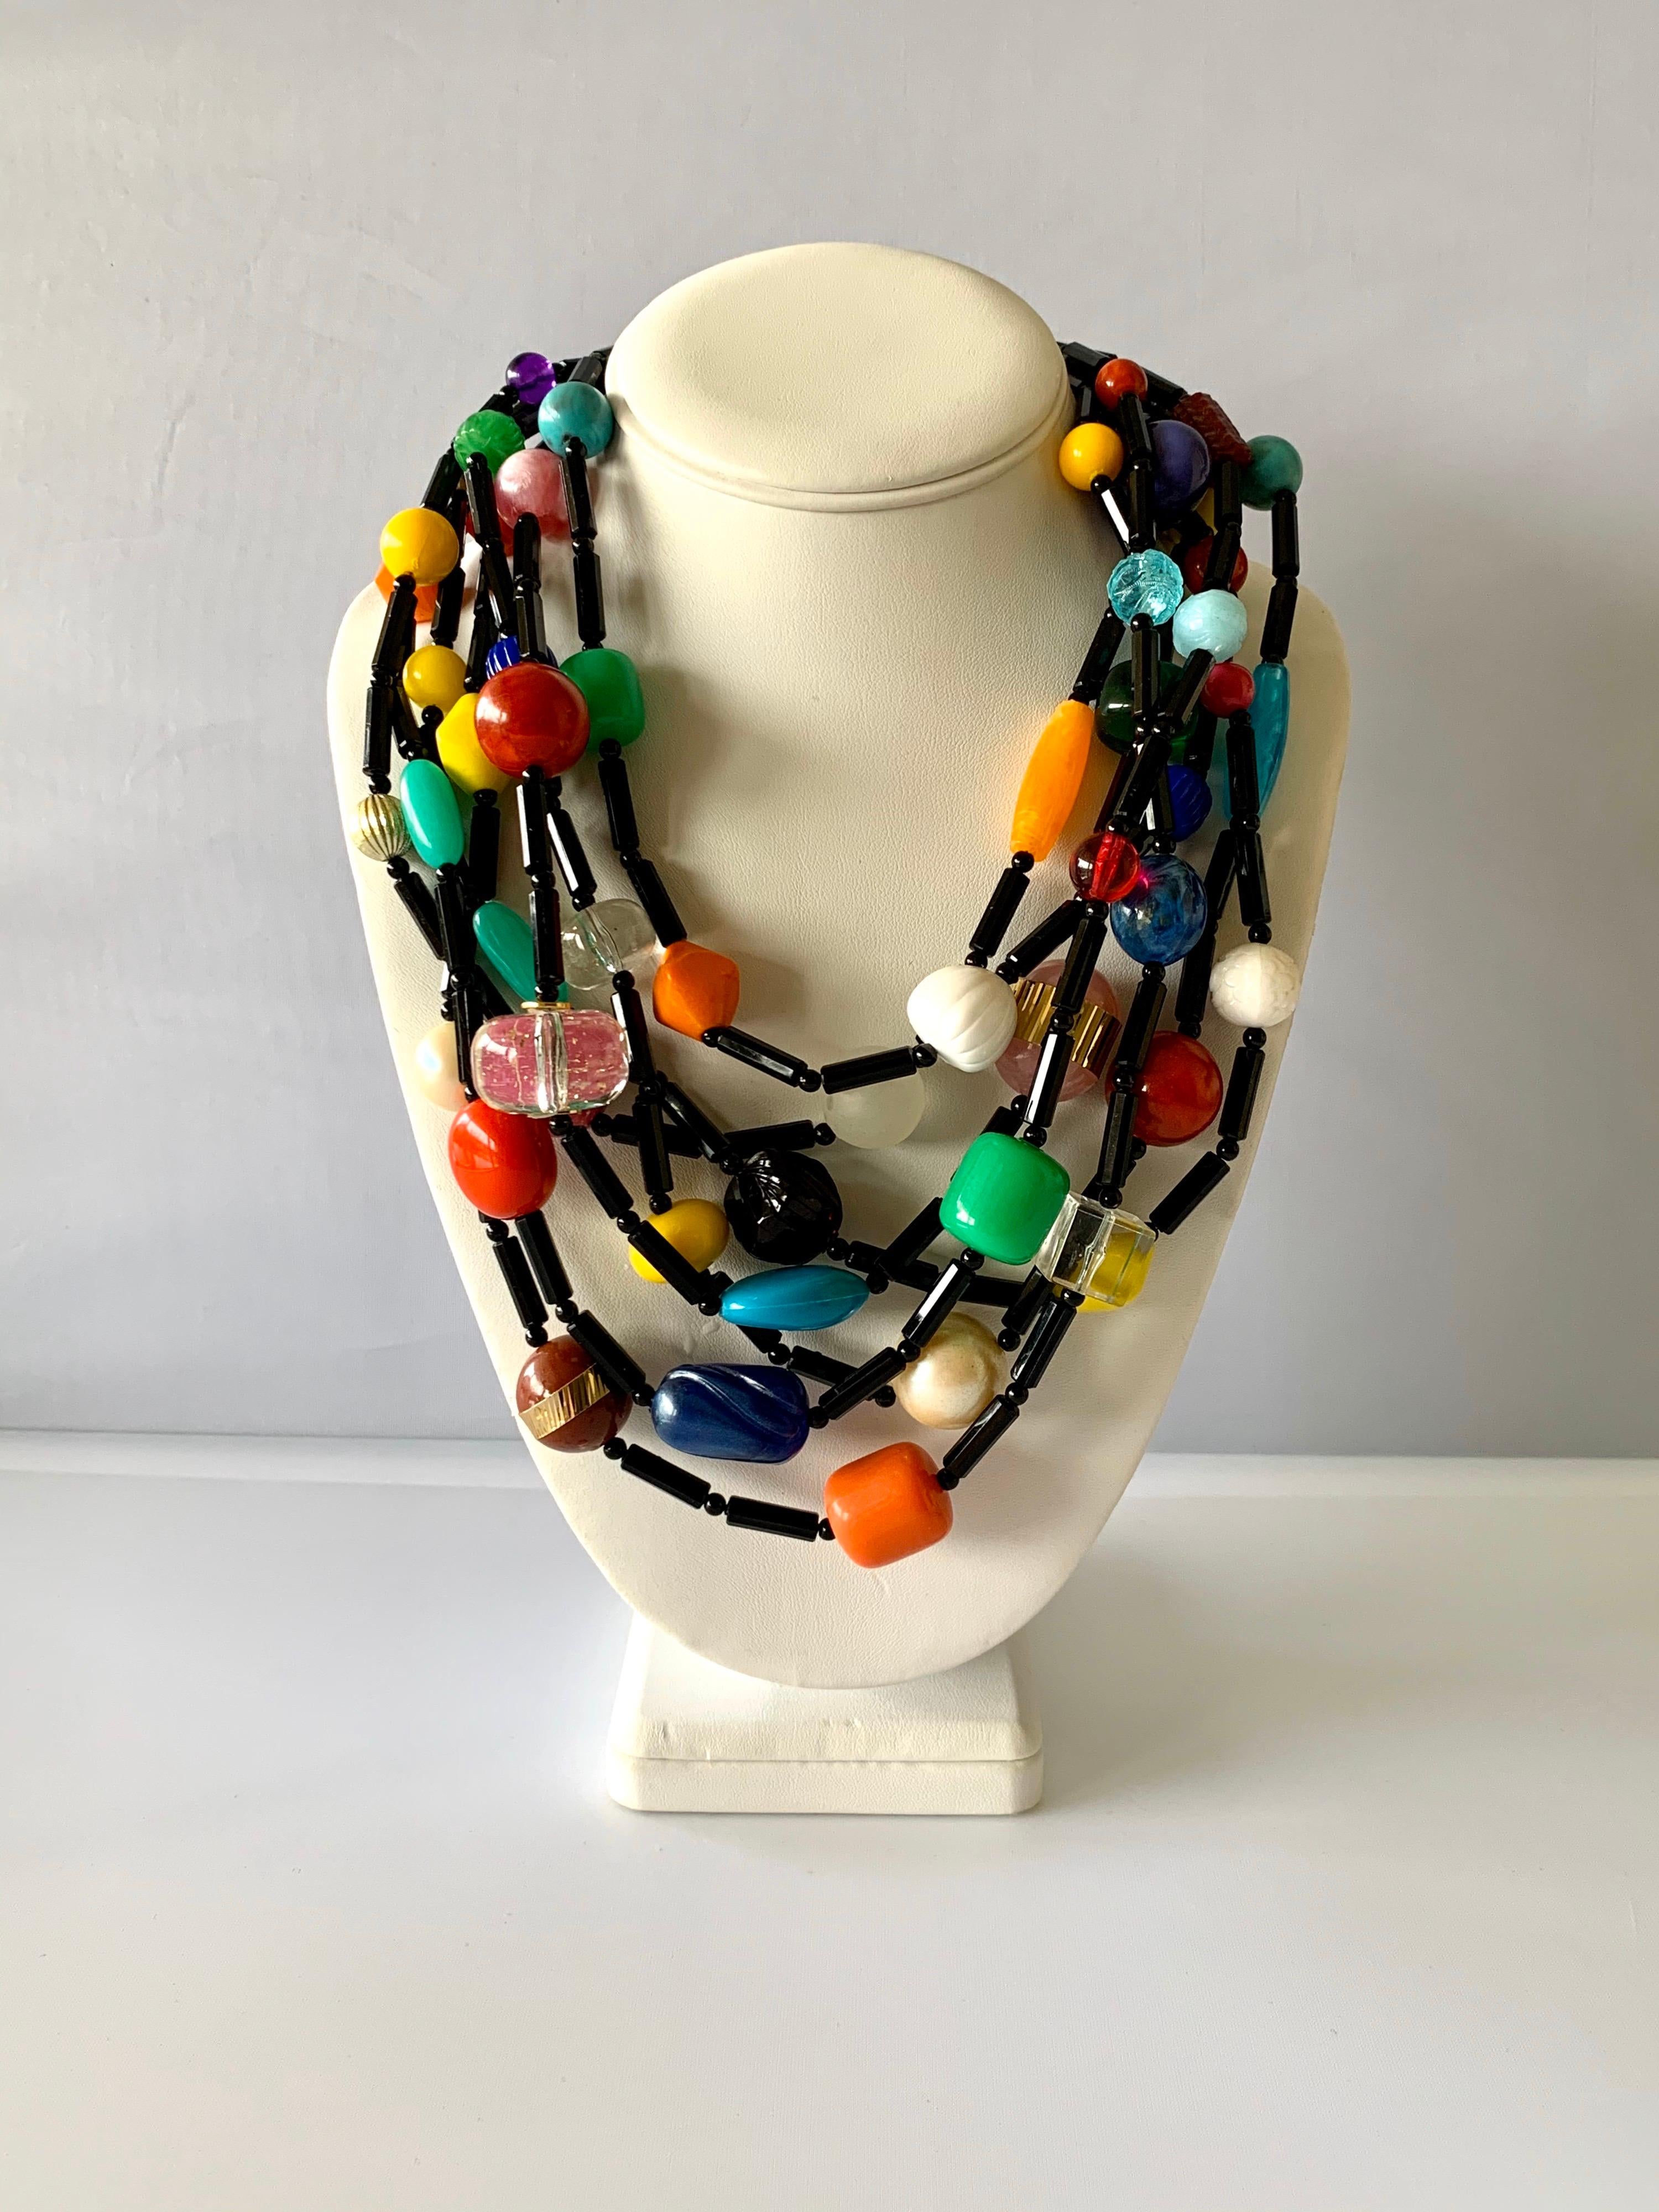 Chunky artisan multi-strand colorful statement necklace - the necklace features seven strands beaded in  round and faceted black architectural beads which are accented by an explosion of colorful phenolic beads (acrylic, bakelite and galalith) in an